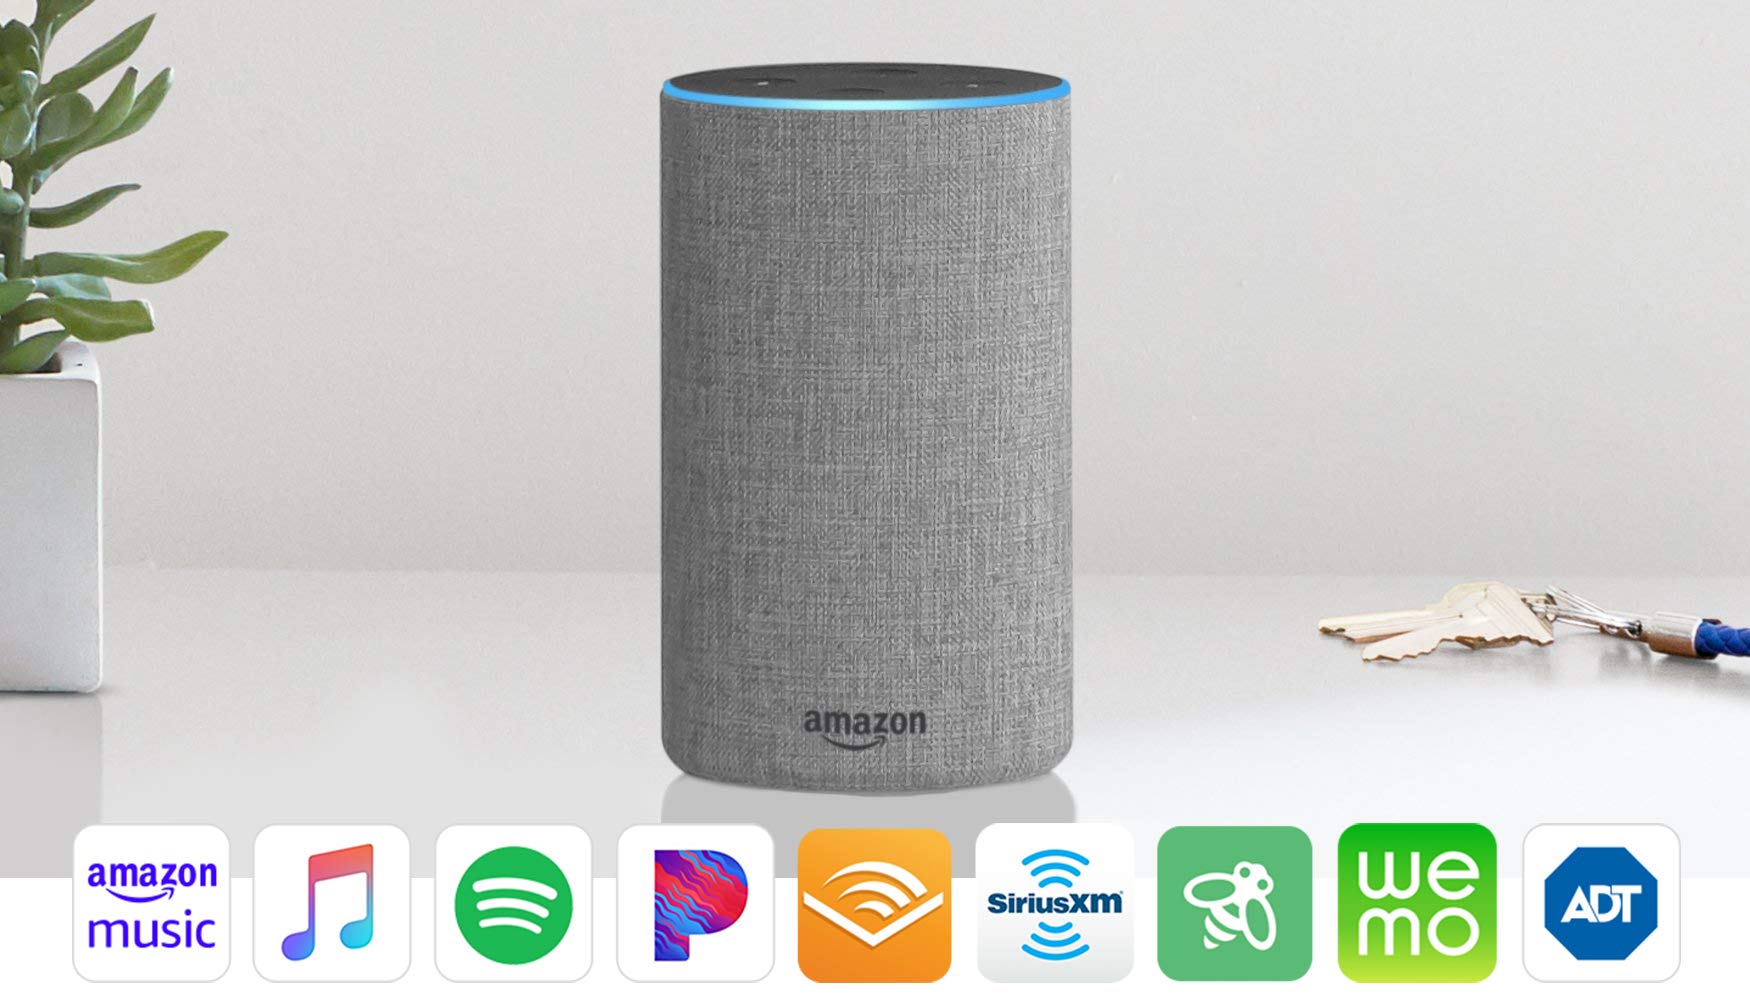 Echo (2nd Generation) - Smart speaker with Alexa and Dolby processing - Heather Gray Fabric